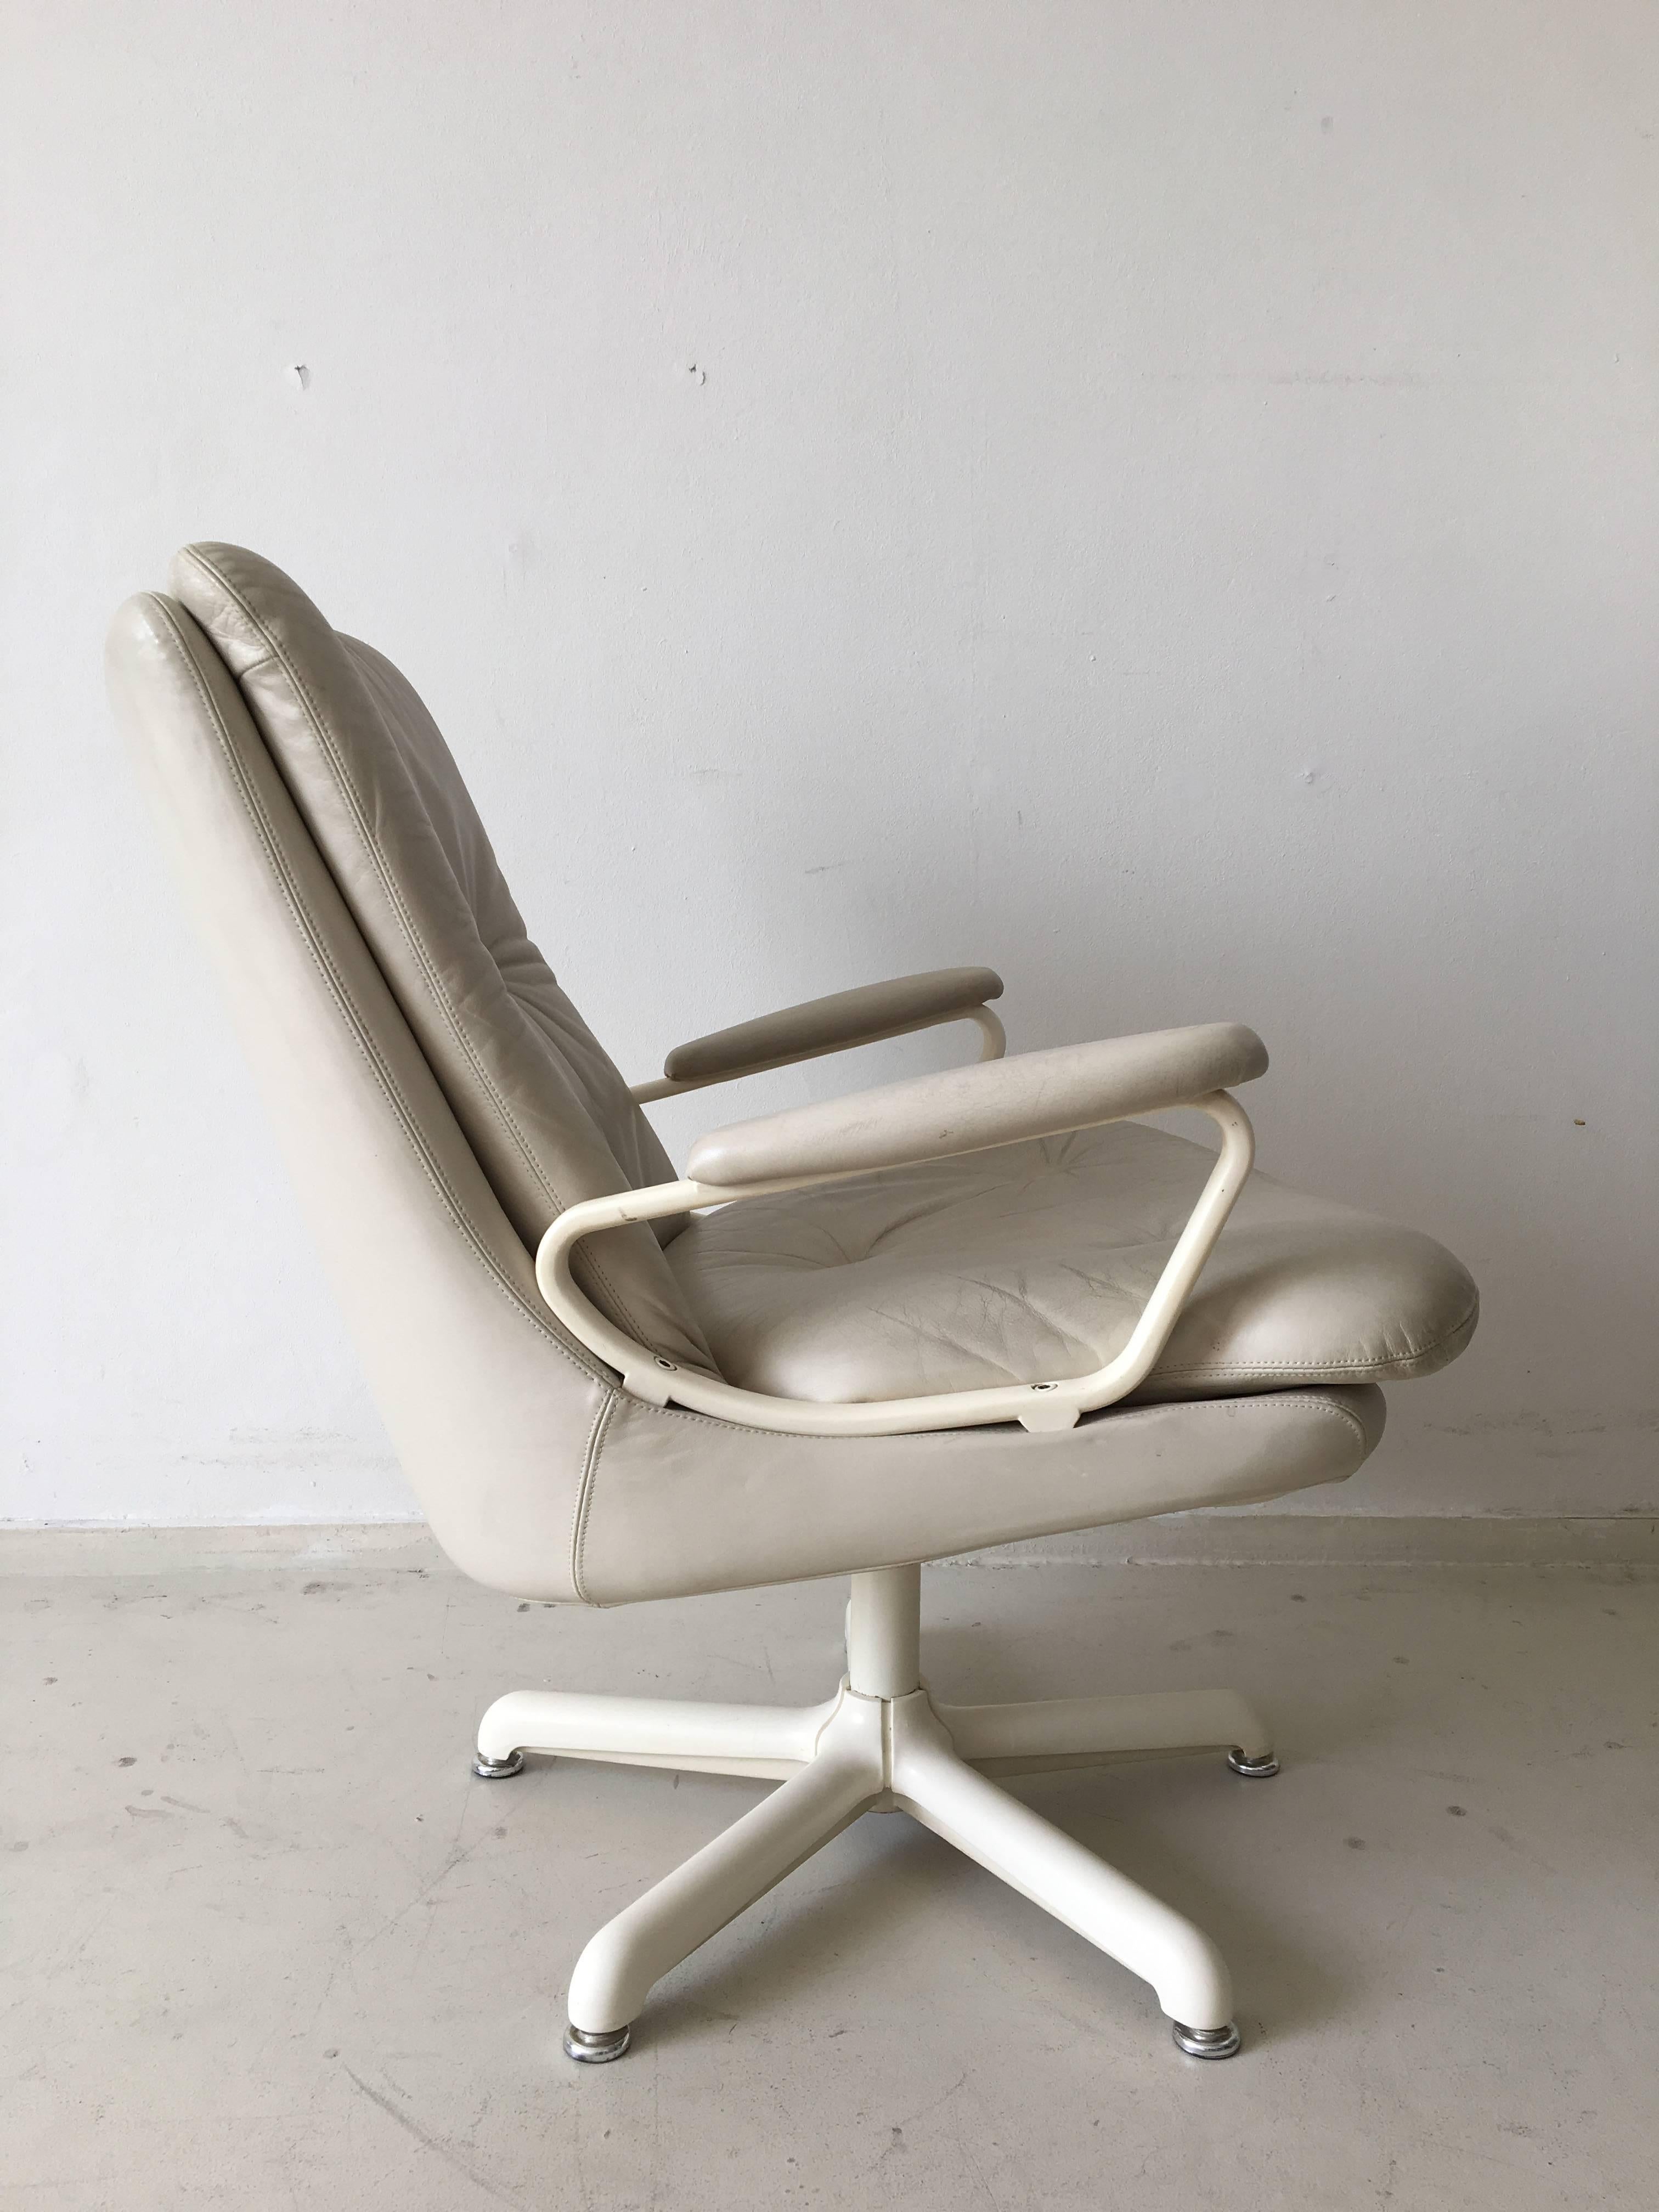 Metal Off White Mid-Century Modern Leather Swivel Chair by Wk Wohnen Germany, 1960s